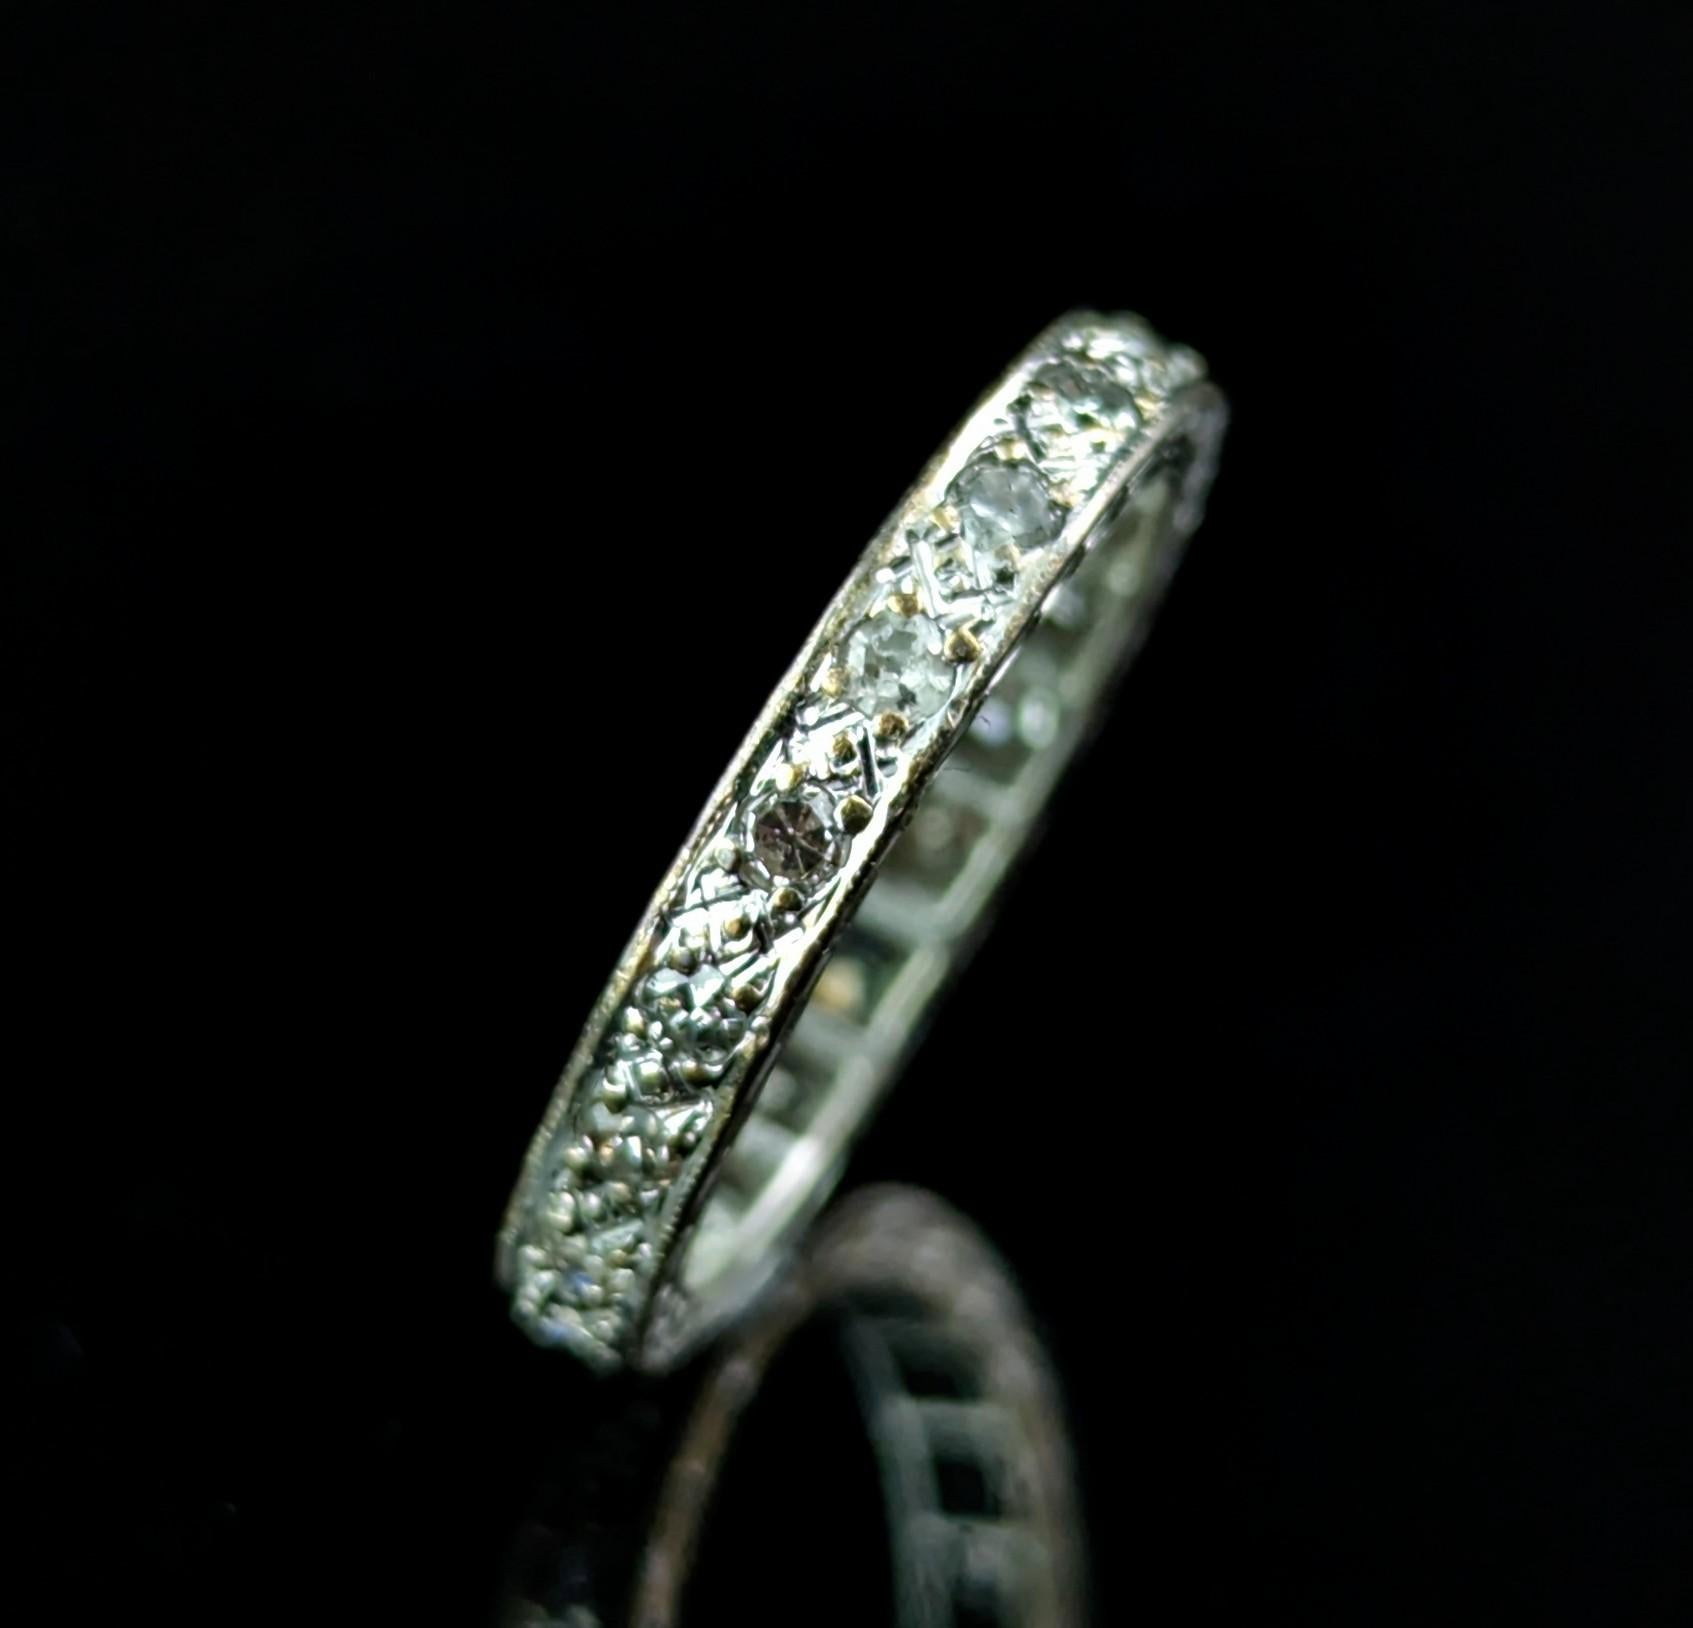 The decadence and elegant beauty of Art Deco eternity rings such as this Diamond ring truly stand the rest of time.

It is a style that has embodied the sentiment of love and connection for centuries with some suggesting the origins go back to